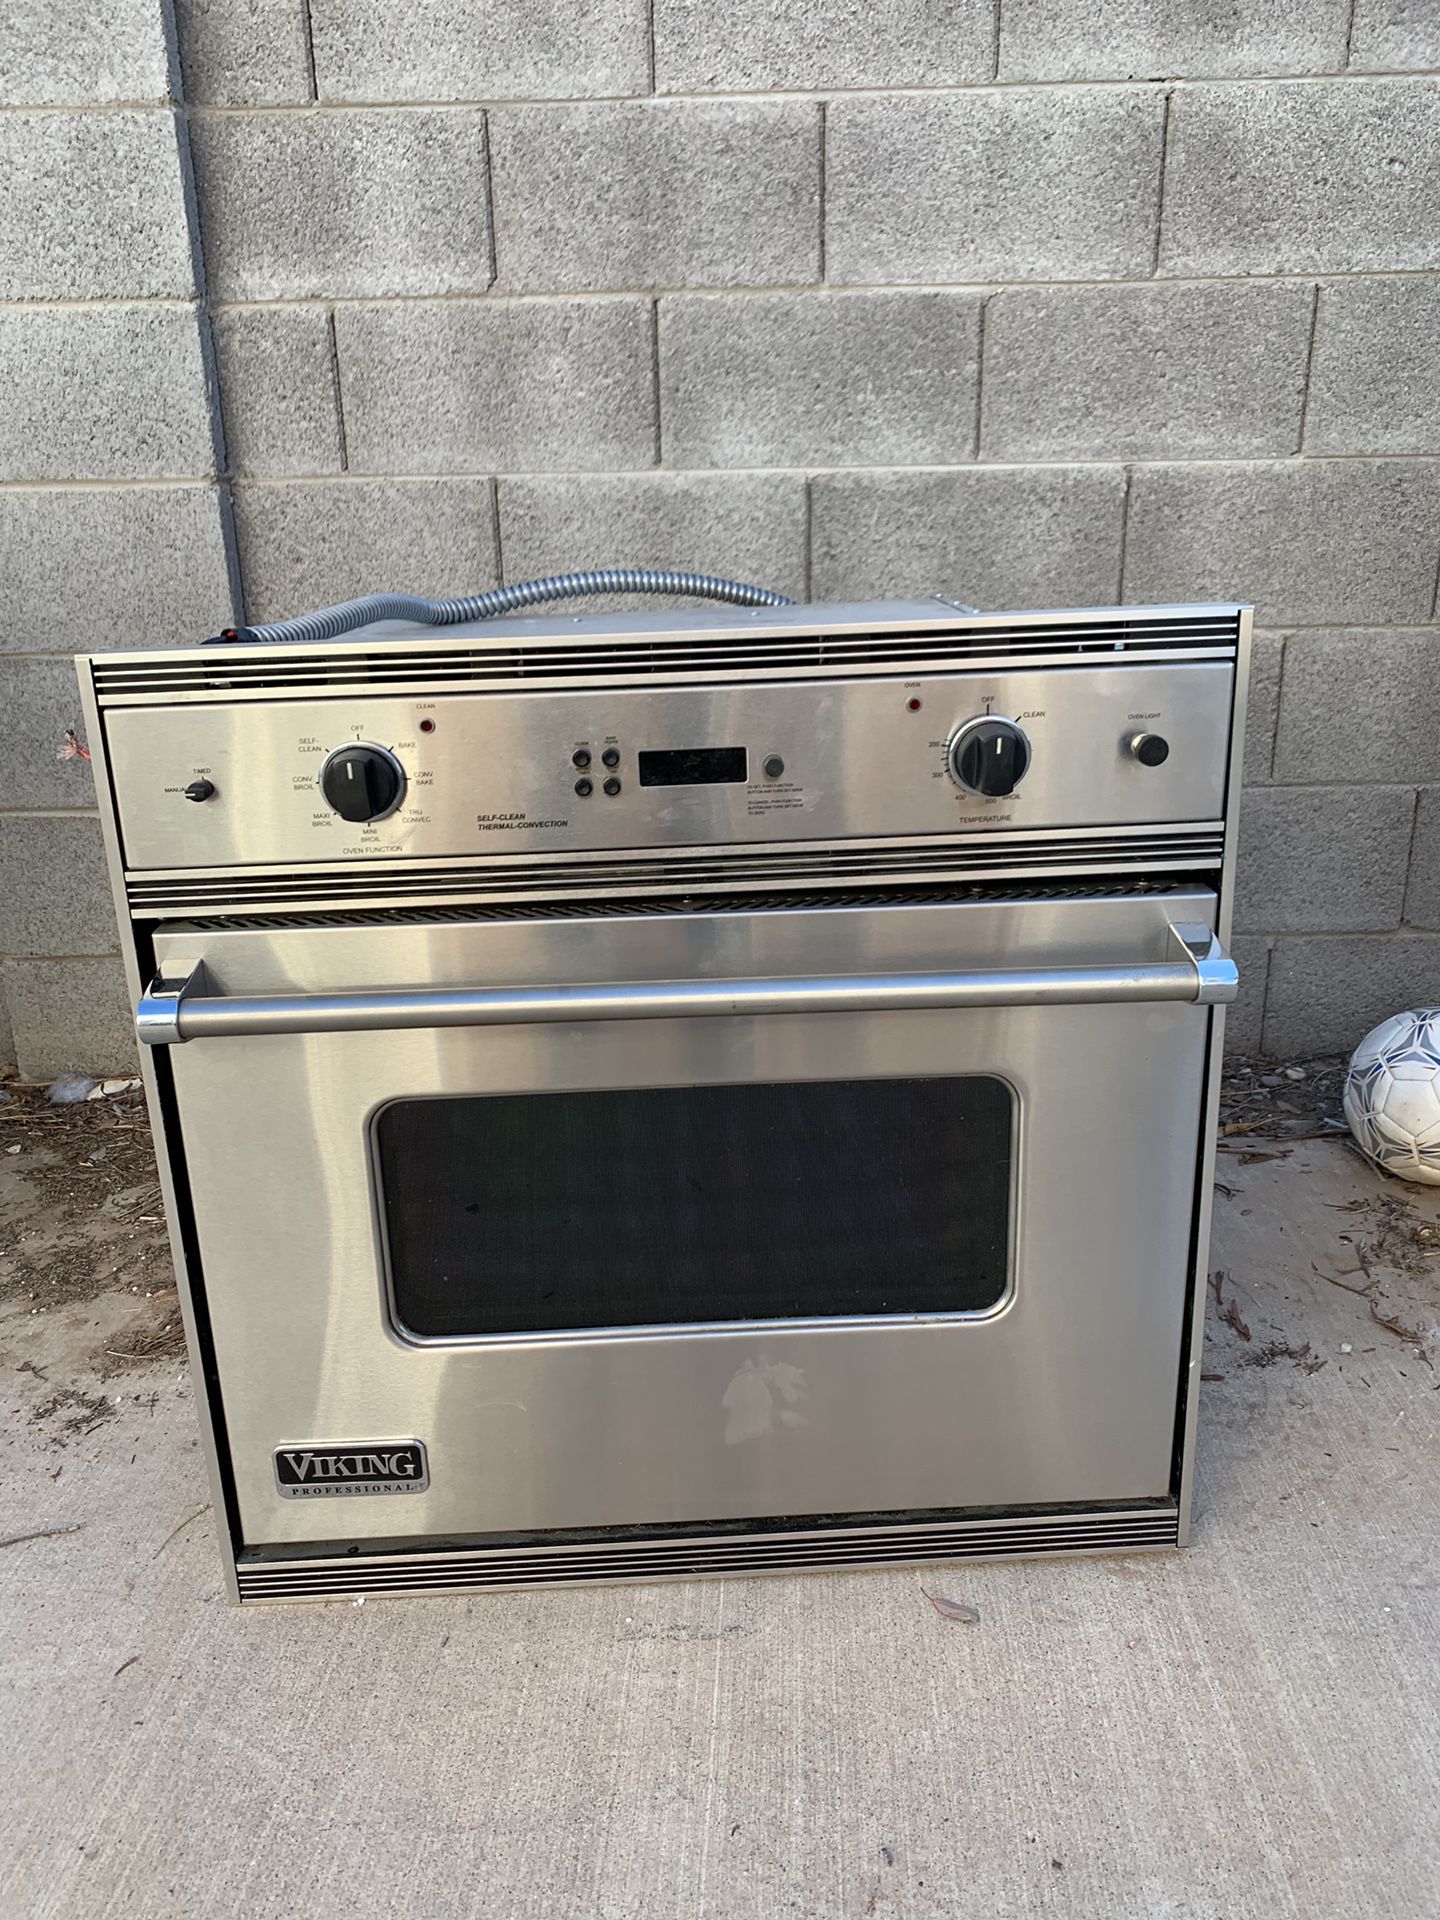 Viking Single Oven. Great condition! 75$ obo